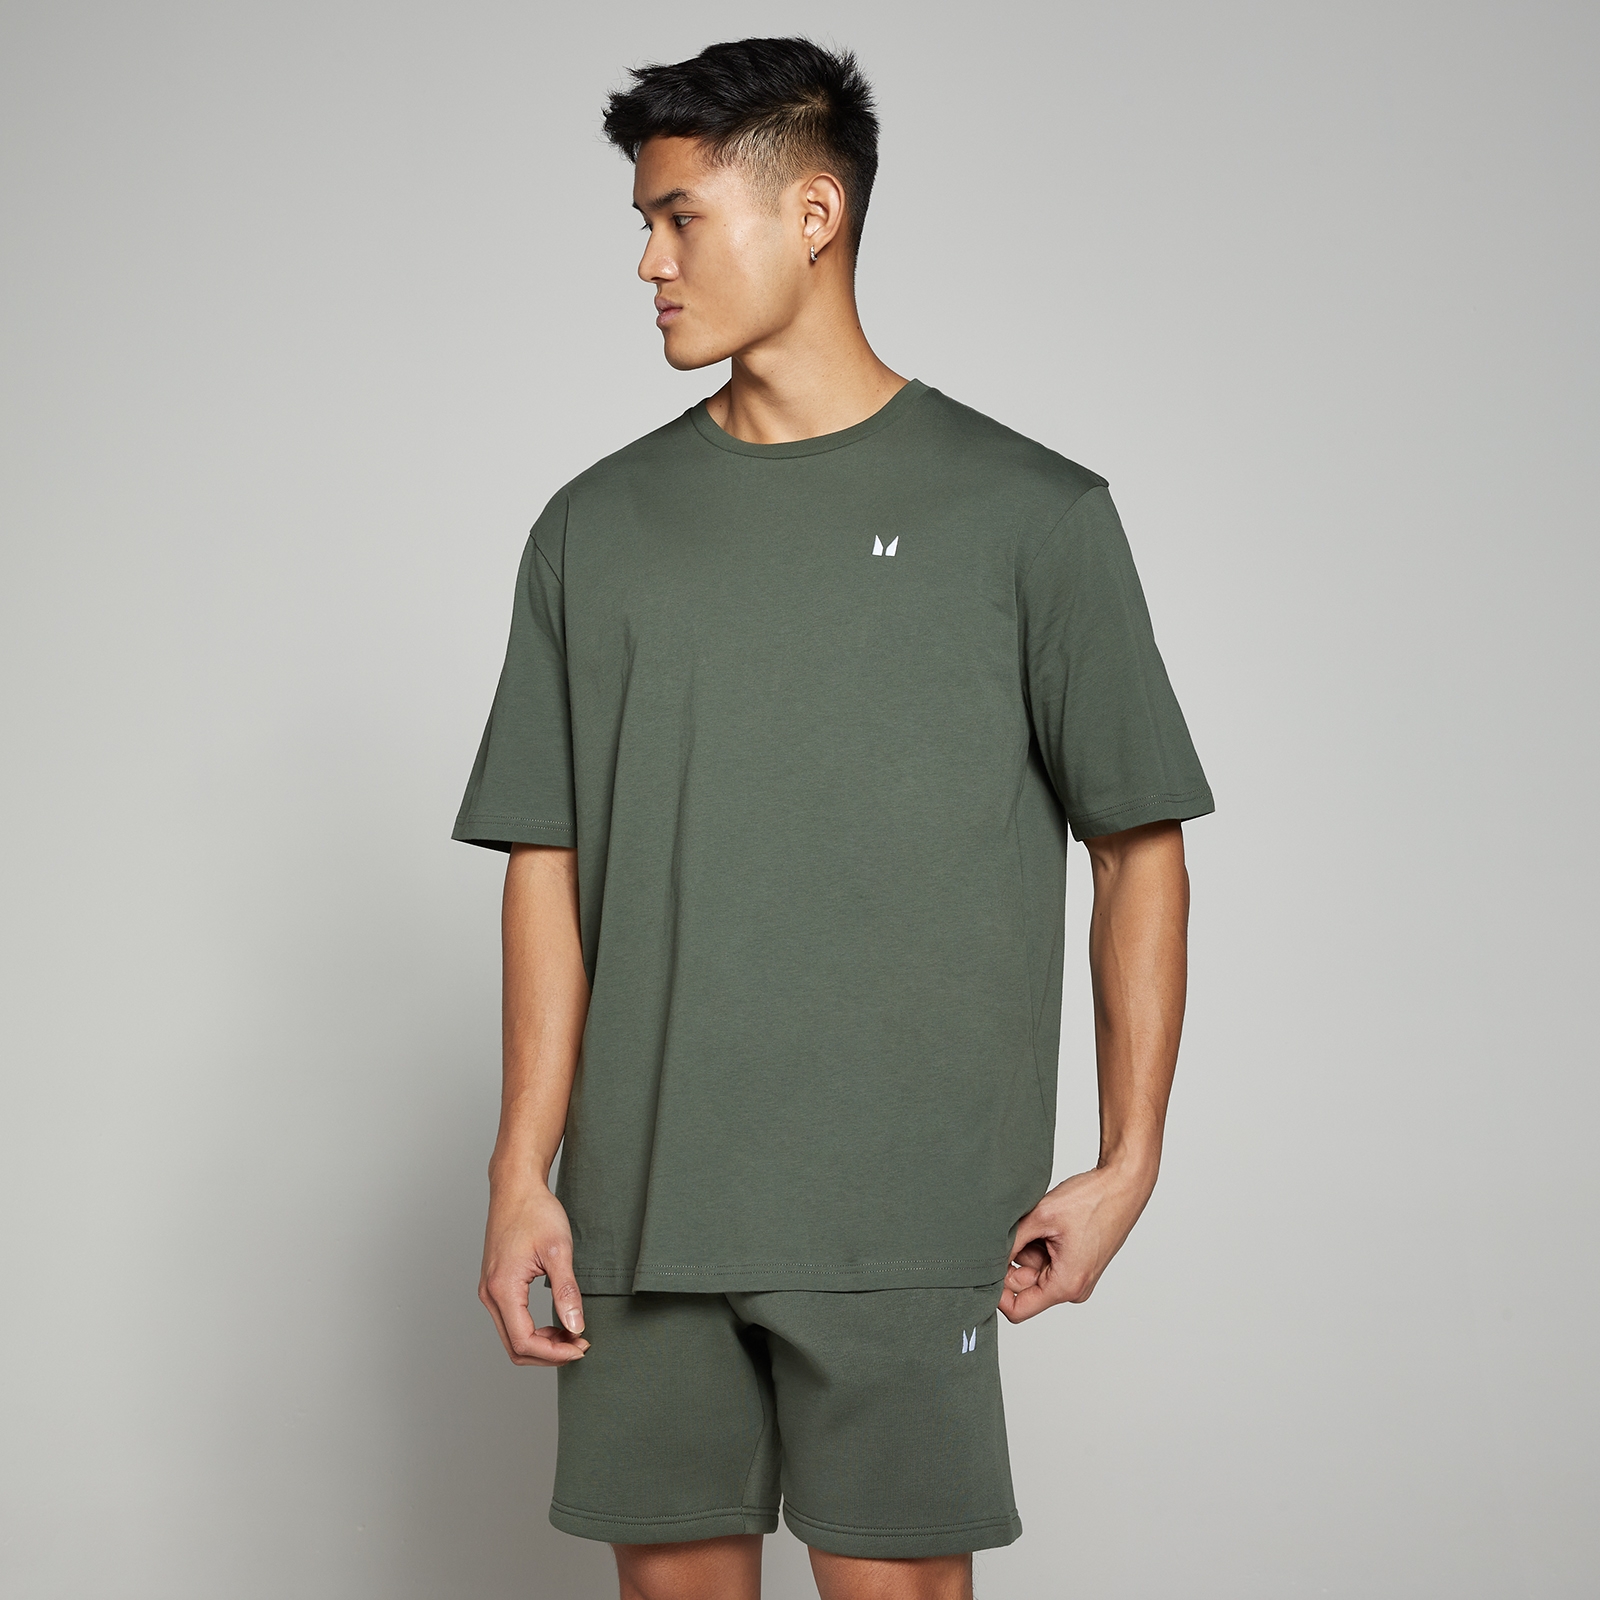 Image of T-shirt oversize MP Rest Day da uomo - Verde timo - XS